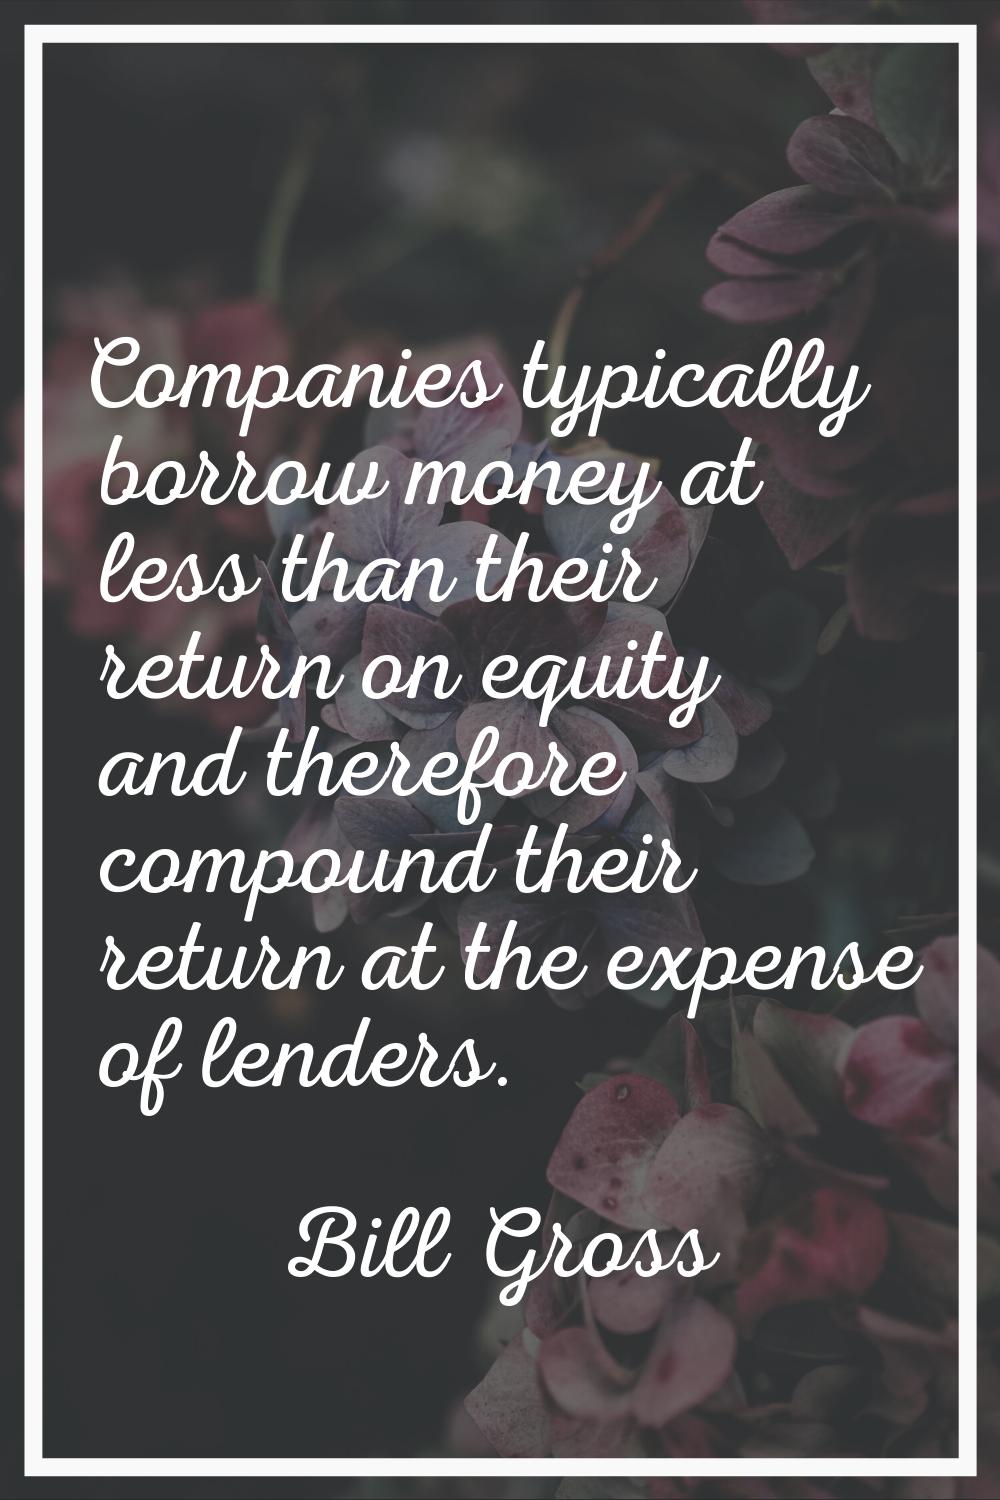 Companies typically borrow money at less than their return on equity and therefore compound their r